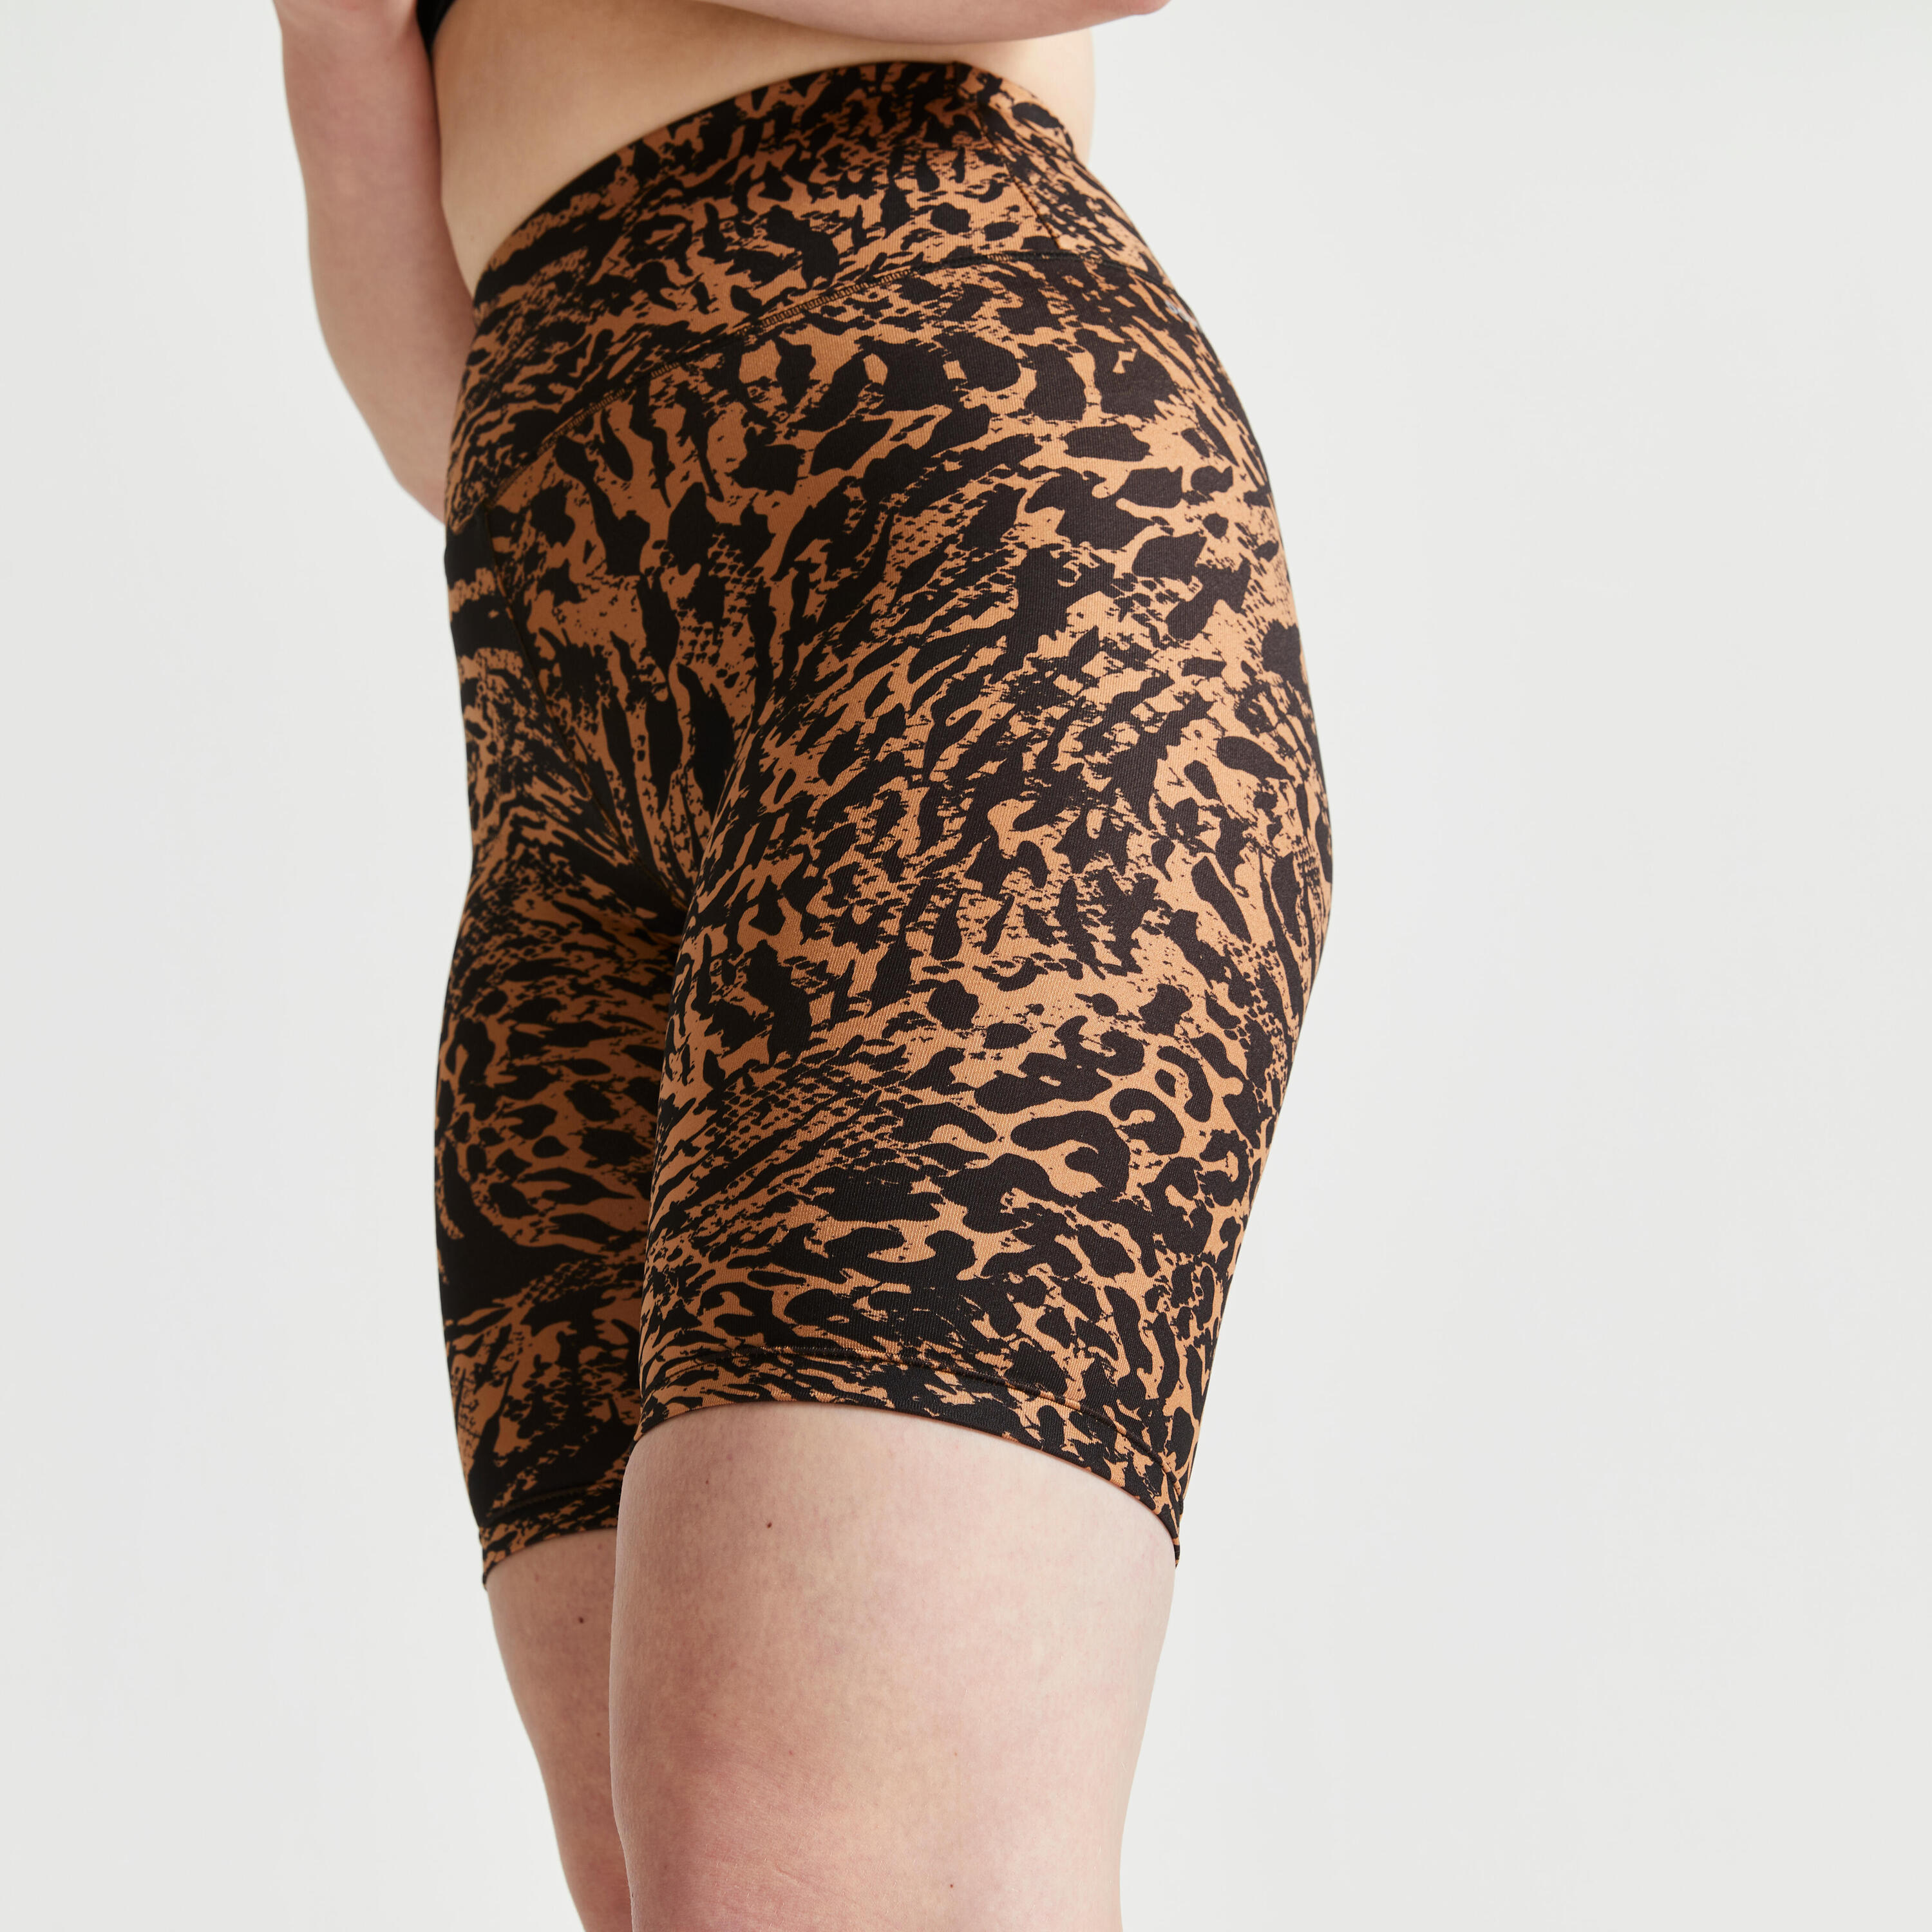 Women's High-Waisted Cardio Fitness Cycling Shorts - Leopard Print 4/4